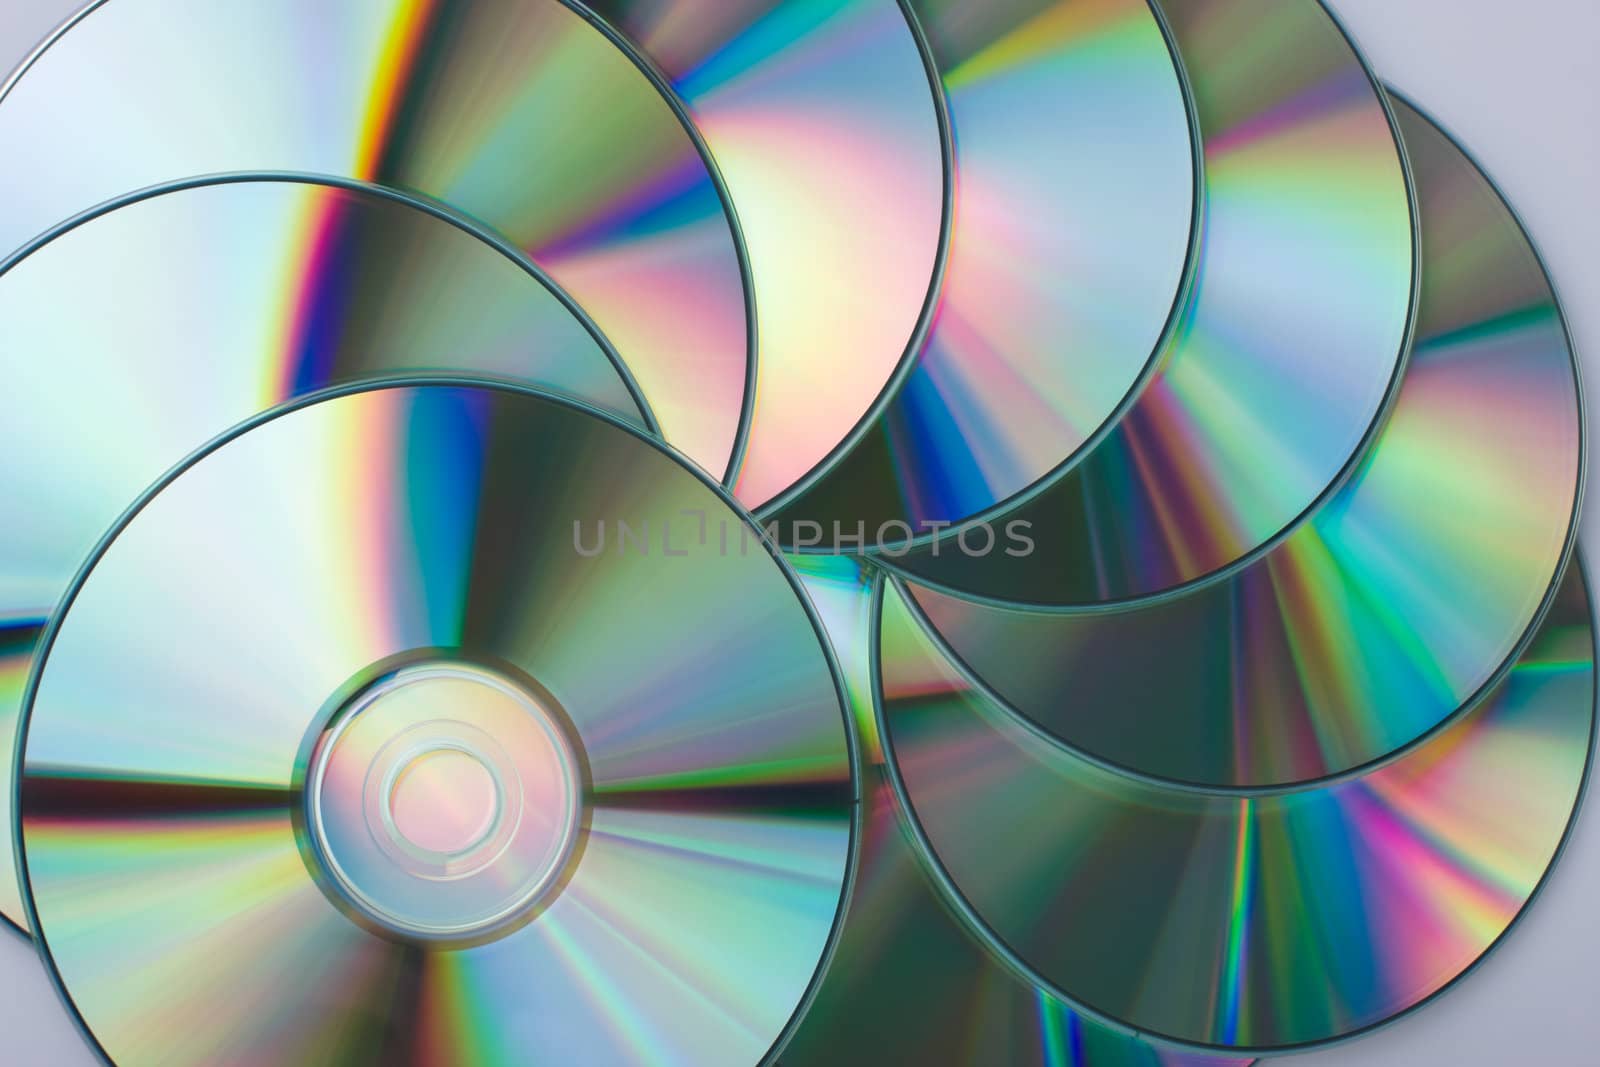 Multicolored CD disks close-up